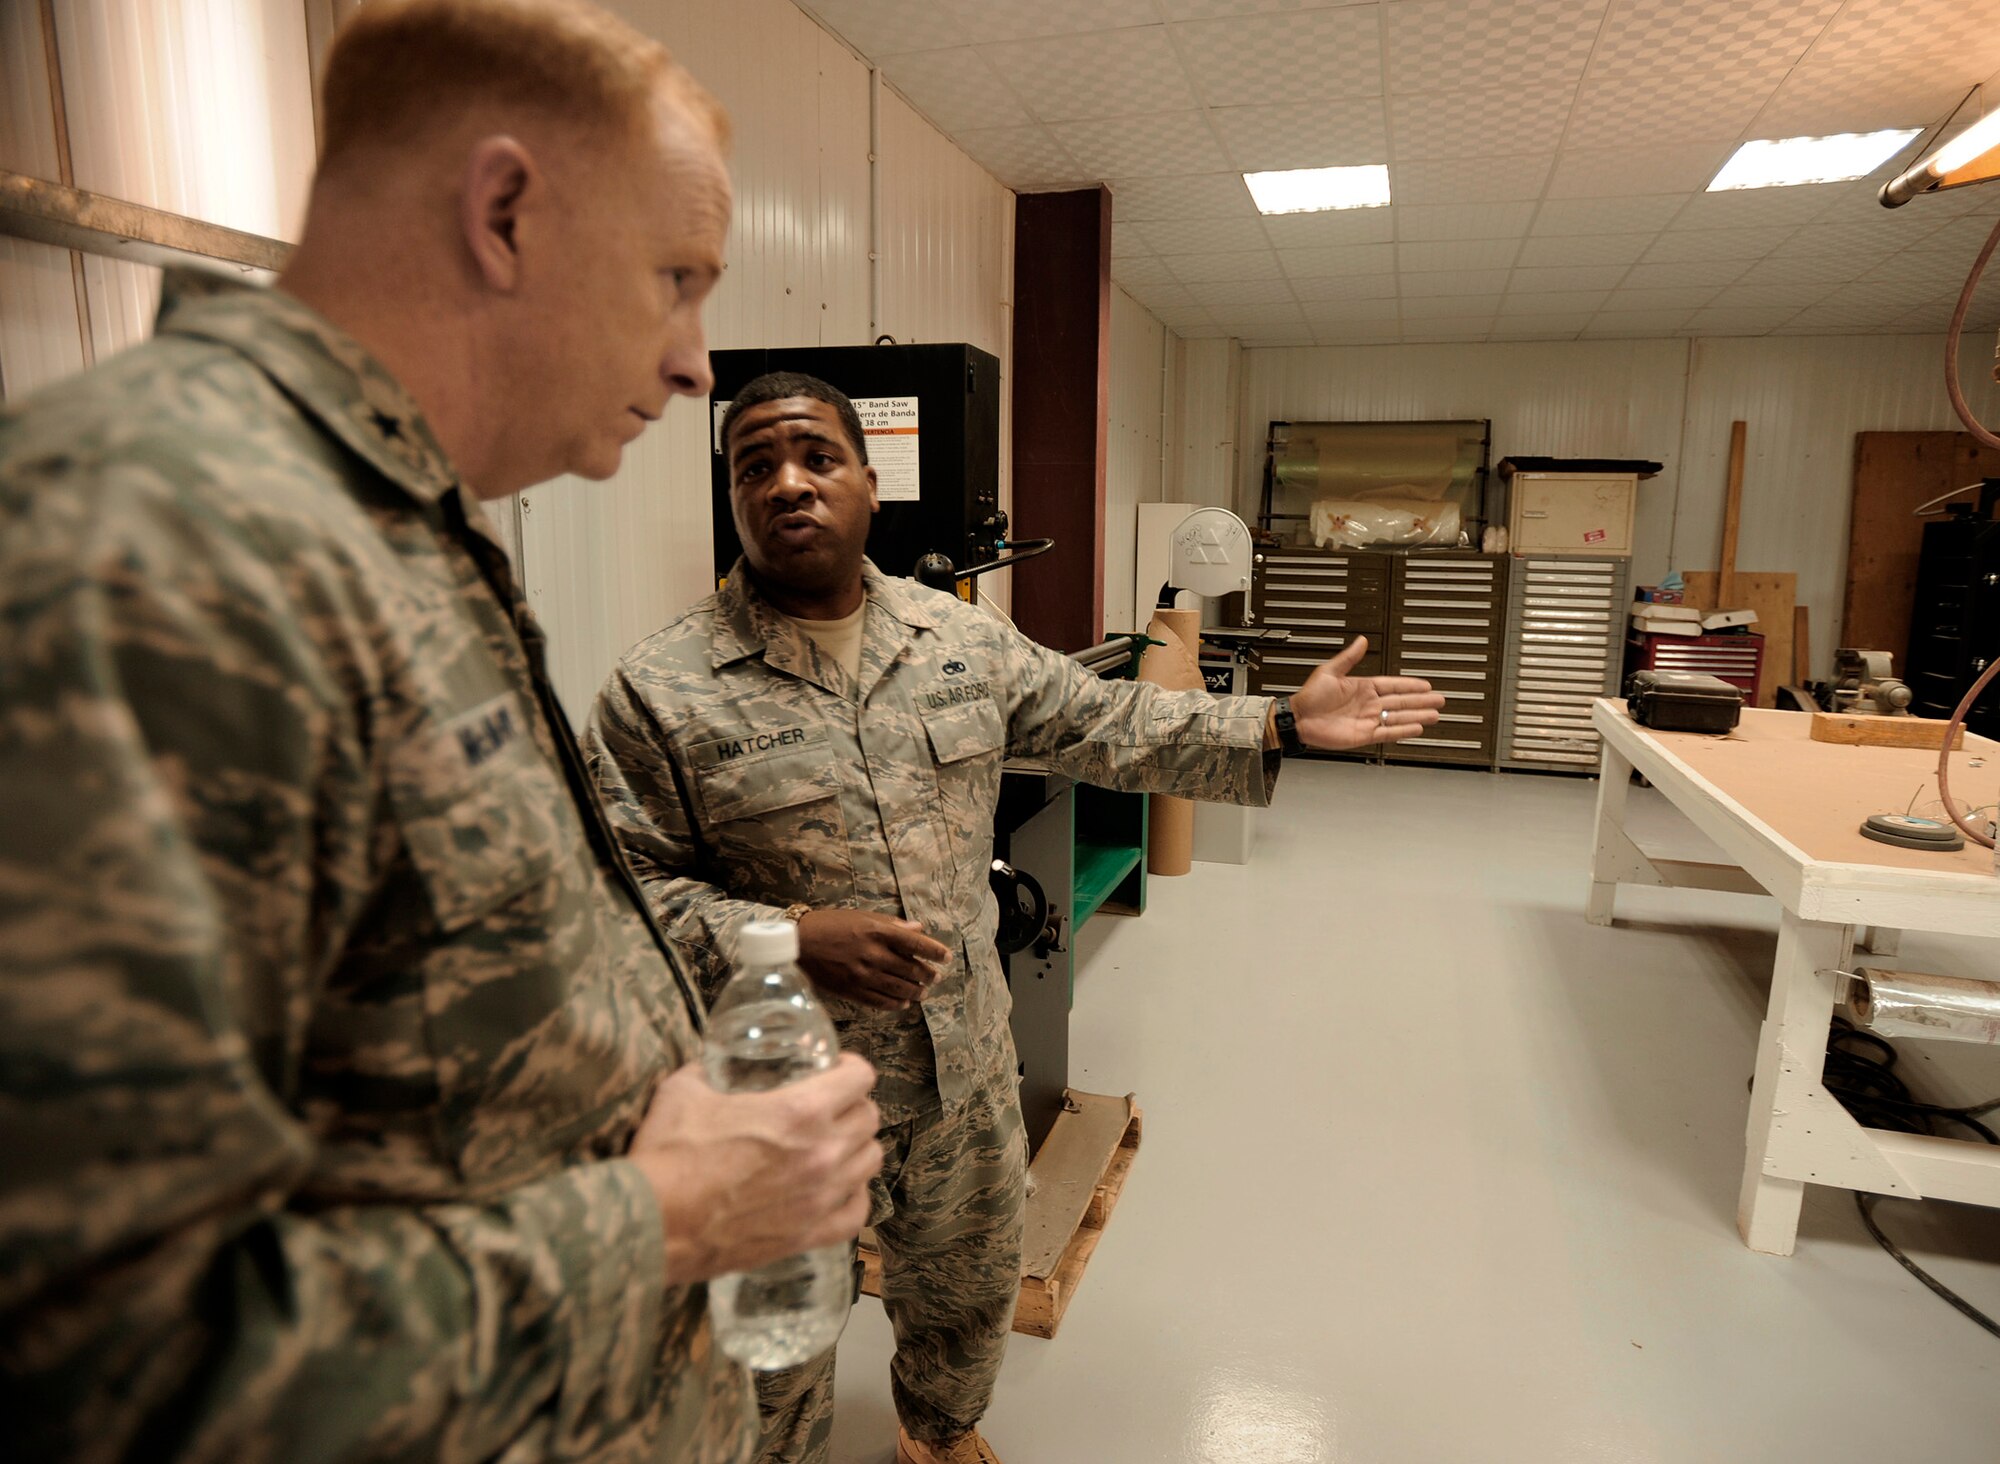 Tech. Sgt. Derrick Hatcher (right) showcases the new metals technology and sheet metal shop to Iraq Security Assistance Mission director Brig. Gen. Robert McMurry Jr. during a visit with 721st Air Expeditionary Advisory Squadron officials April 27, 2011, at Camp Taji, Iraq. Sergeant Hatcher is a sheet metal adviser for Iraq Training and Advisory Mission - Air. (U.S. Air Force/Tech. Sgt. Jason Lake)